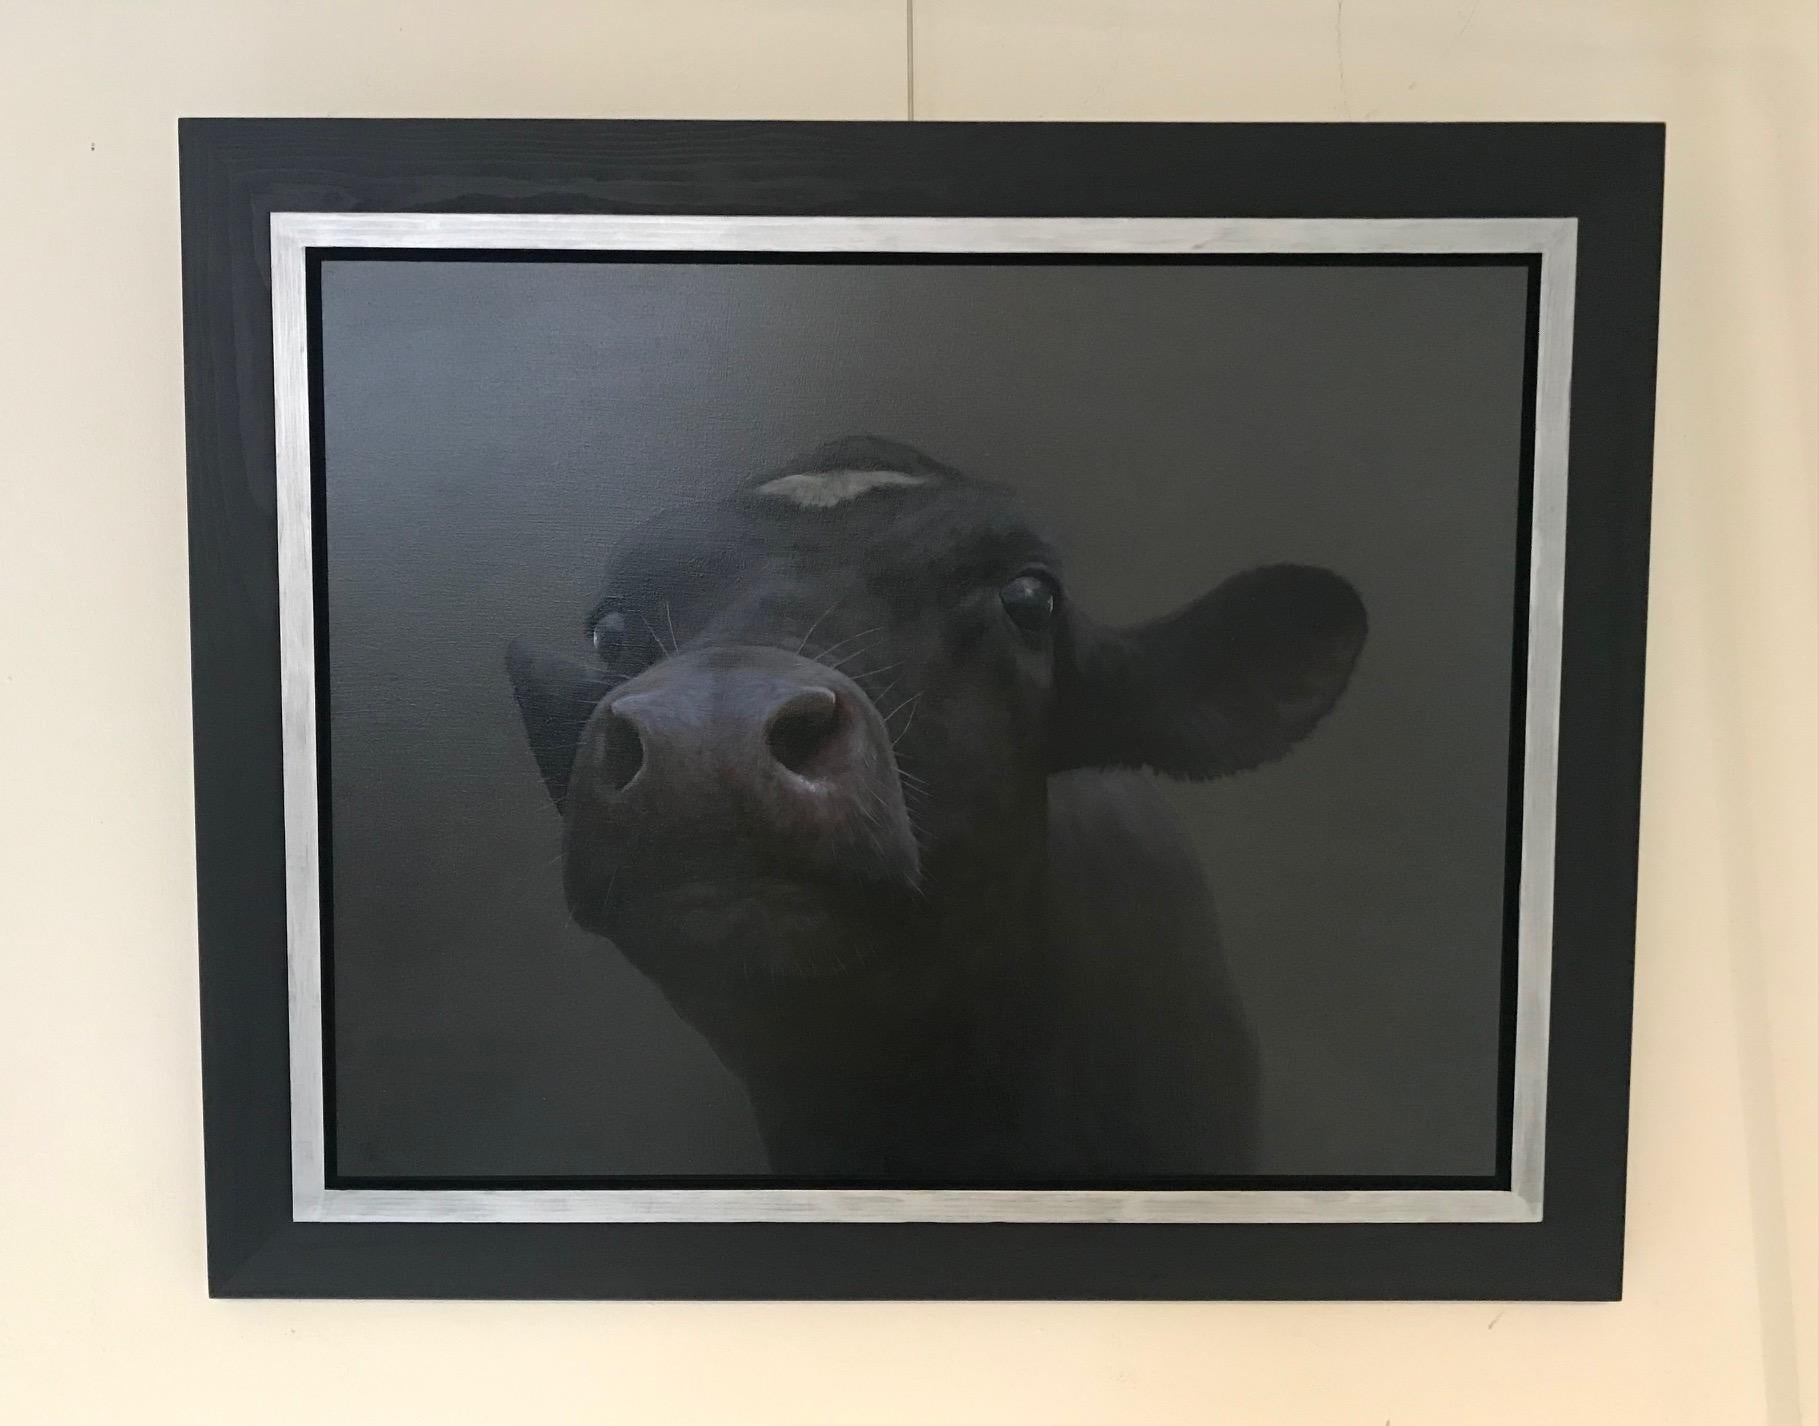 The oil paintings of the contemporary Dutch artist Paul Jansen invites the viewer to look beyond the standard picture within the frame. It feels as if the curious animal really reaches out of the frame, as if the viewer stands face-to-face with the